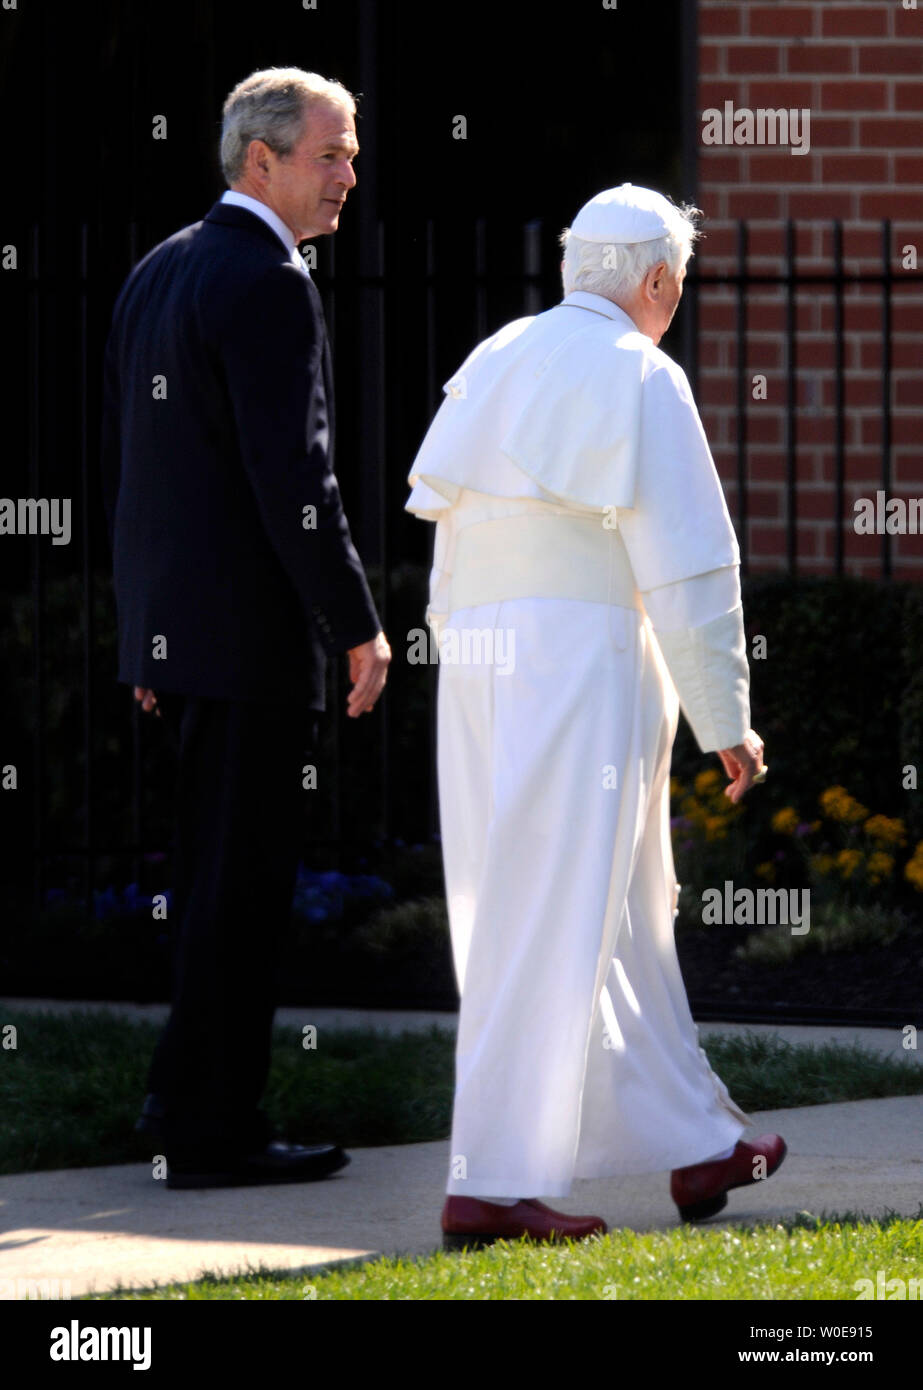 U.S. President George W. Bush walks with Pope Benedict XVI after the Pope arrived on his first visit to the United States at Andrew Air Force base outside of Washington on April 15, 2008. (UPI Photo/Kevin Dietsch) Stock Photo